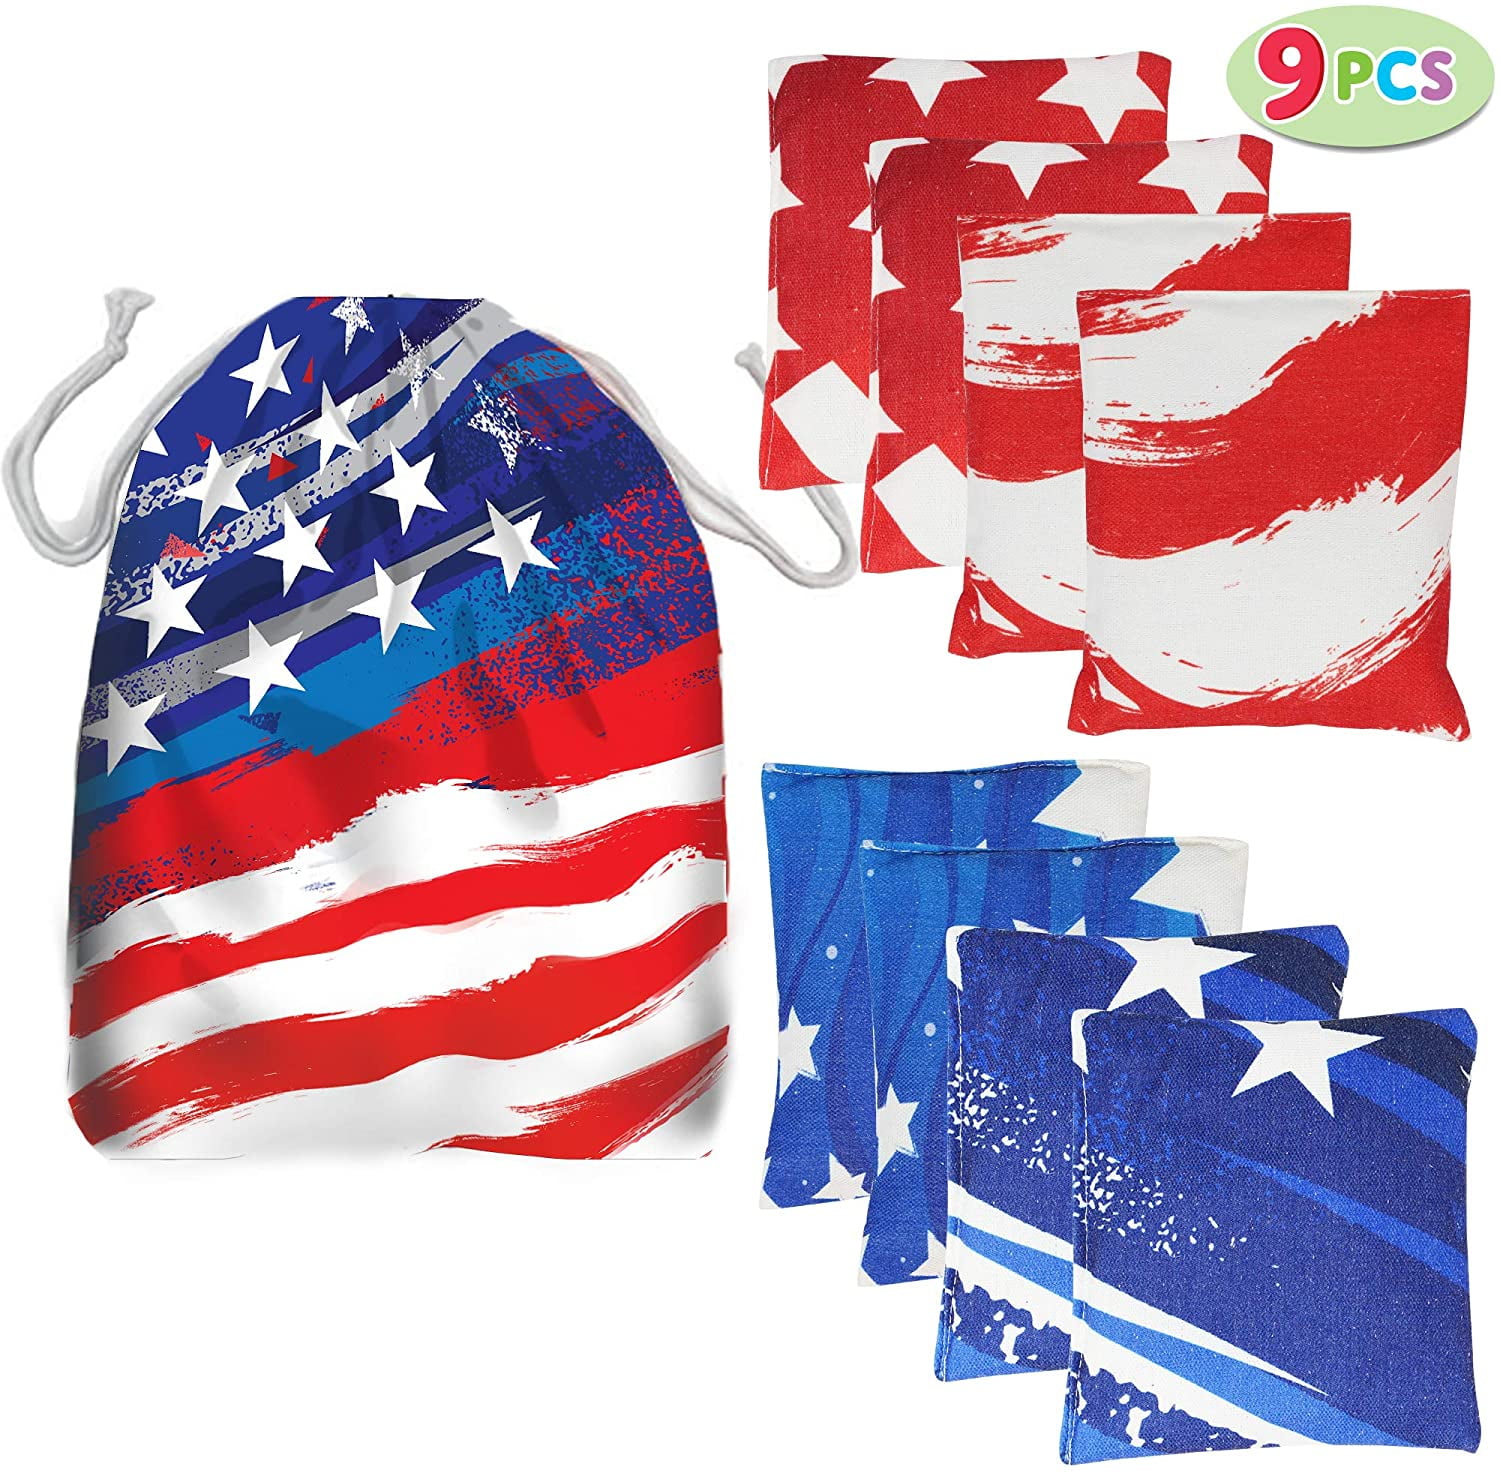 Double Sided Slick and Stick Beans Bags Set of 8 Professional Cornhole Bags 